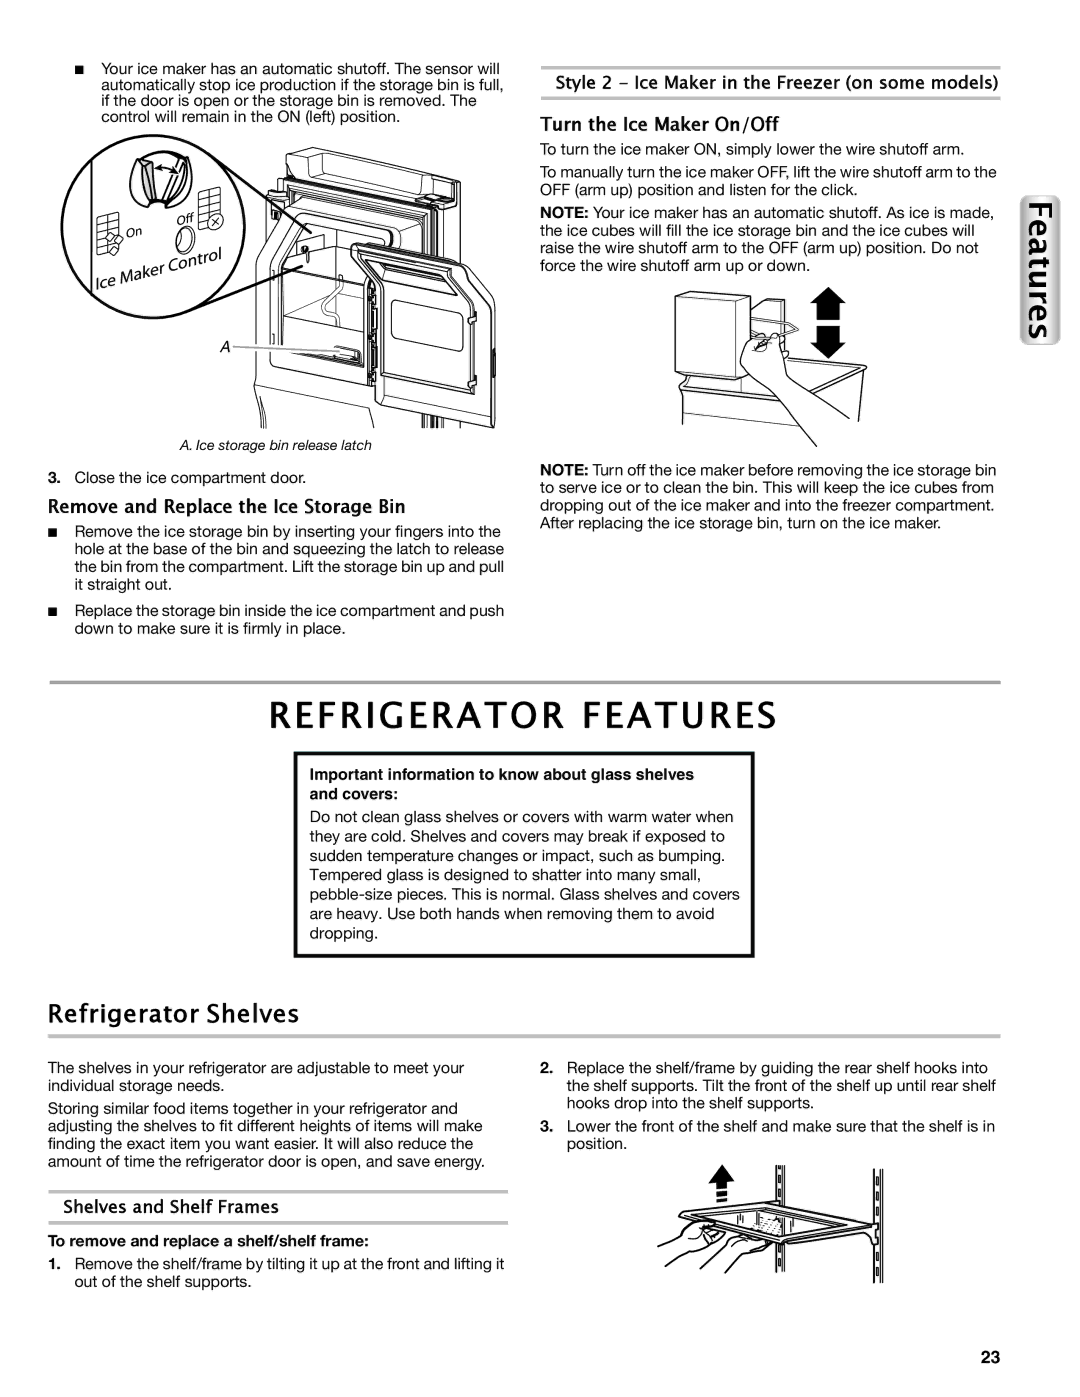 Maytag W10558103A manual Refrigerator Features, Refrigerator Shelves, Turn the Ice Maker On/Off, Shelves and Shelf Frames 